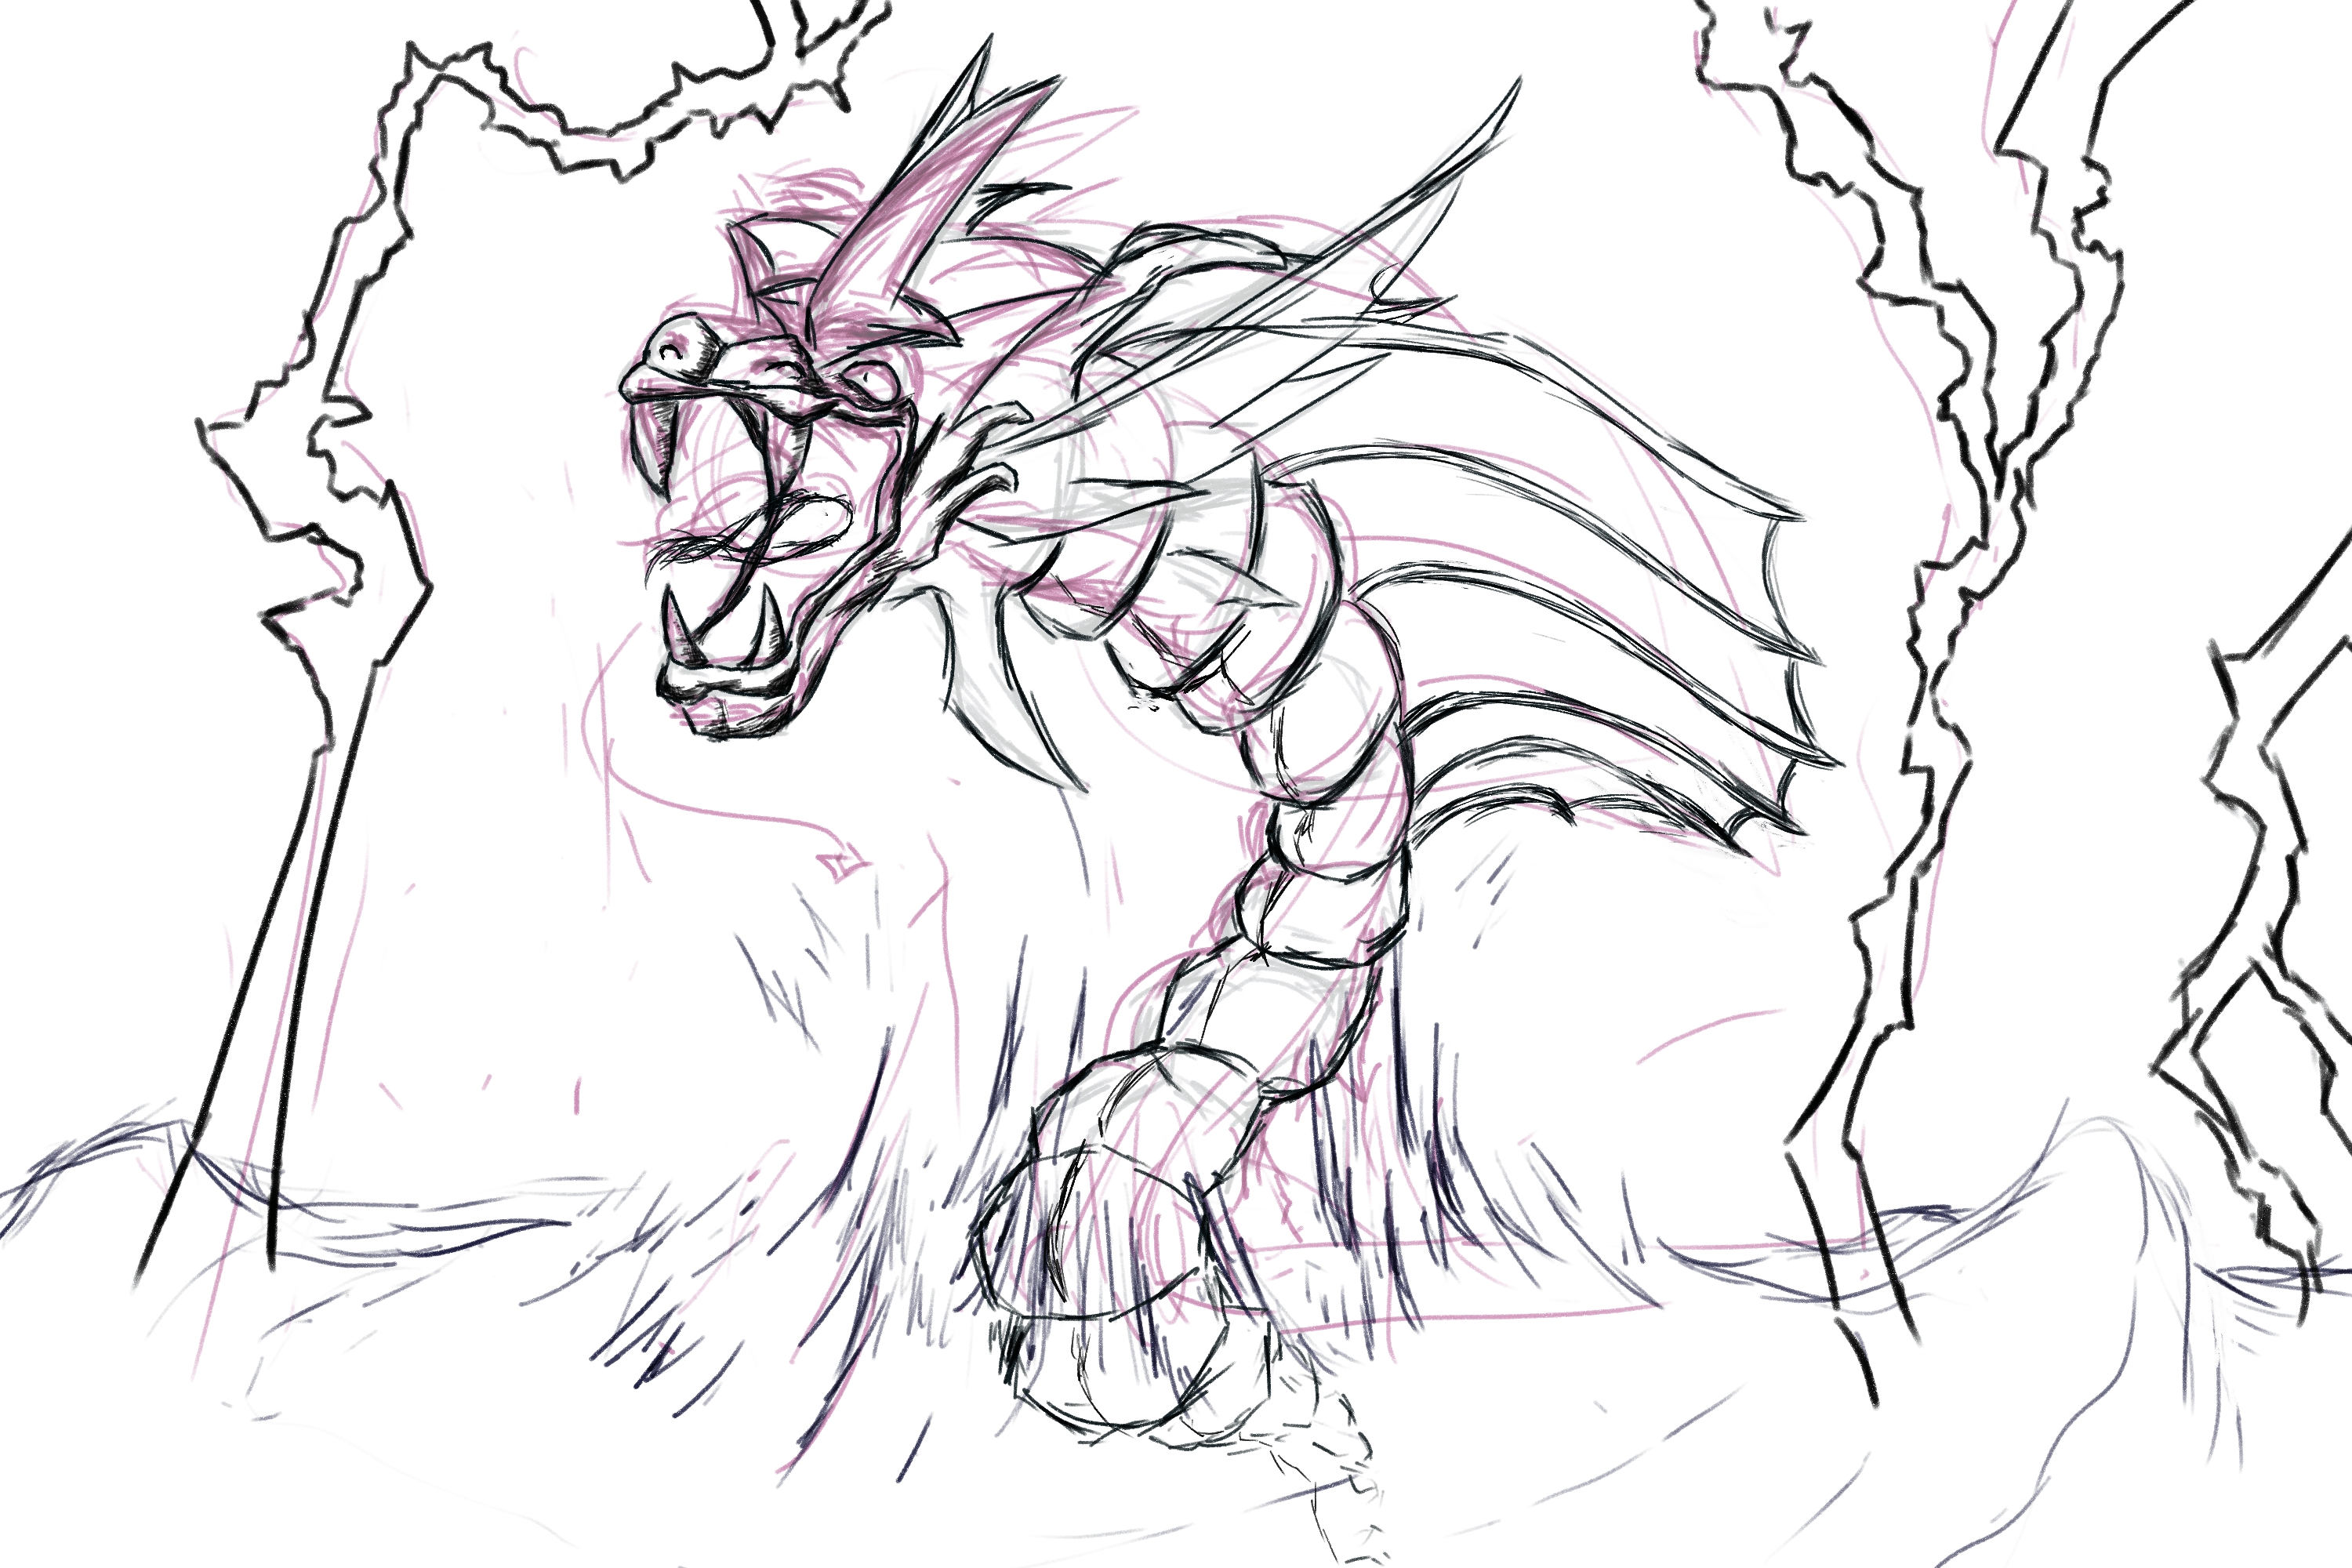 Quick unfinished sketch of a paradox past form of gyarados by me oc r pokemon